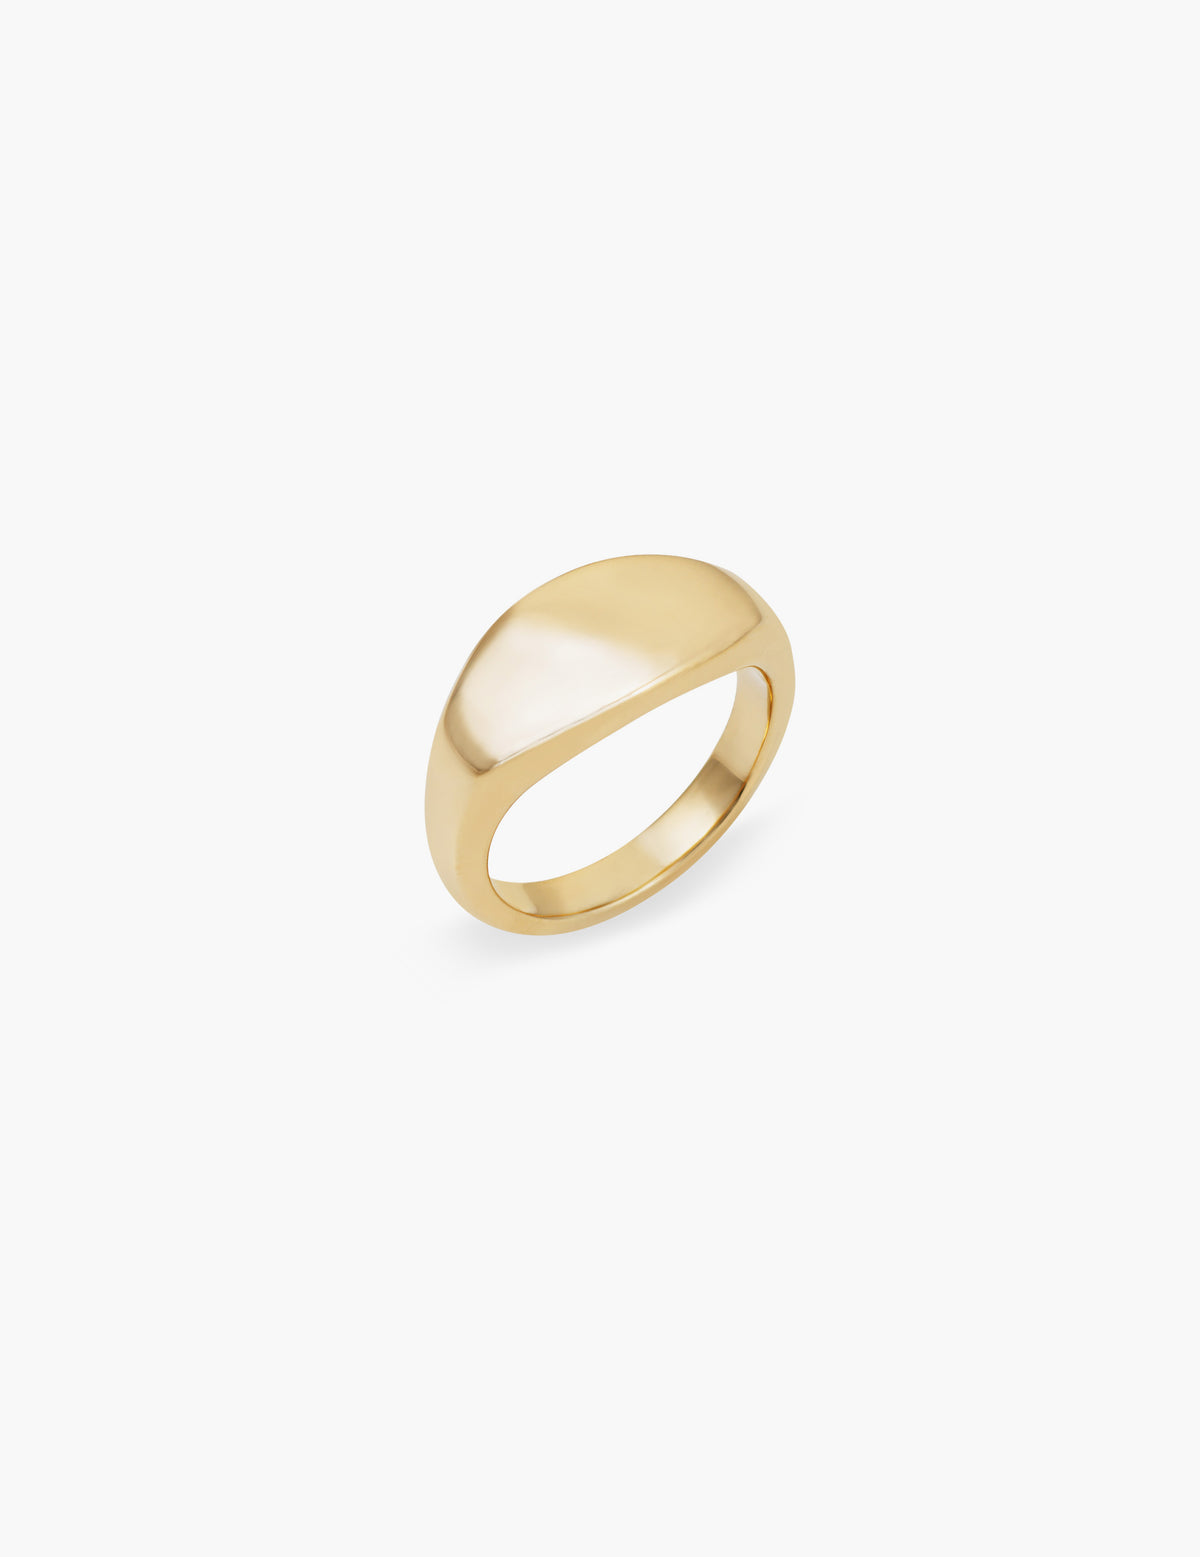 Small Oval Signet Ring - Kathryn Bentley